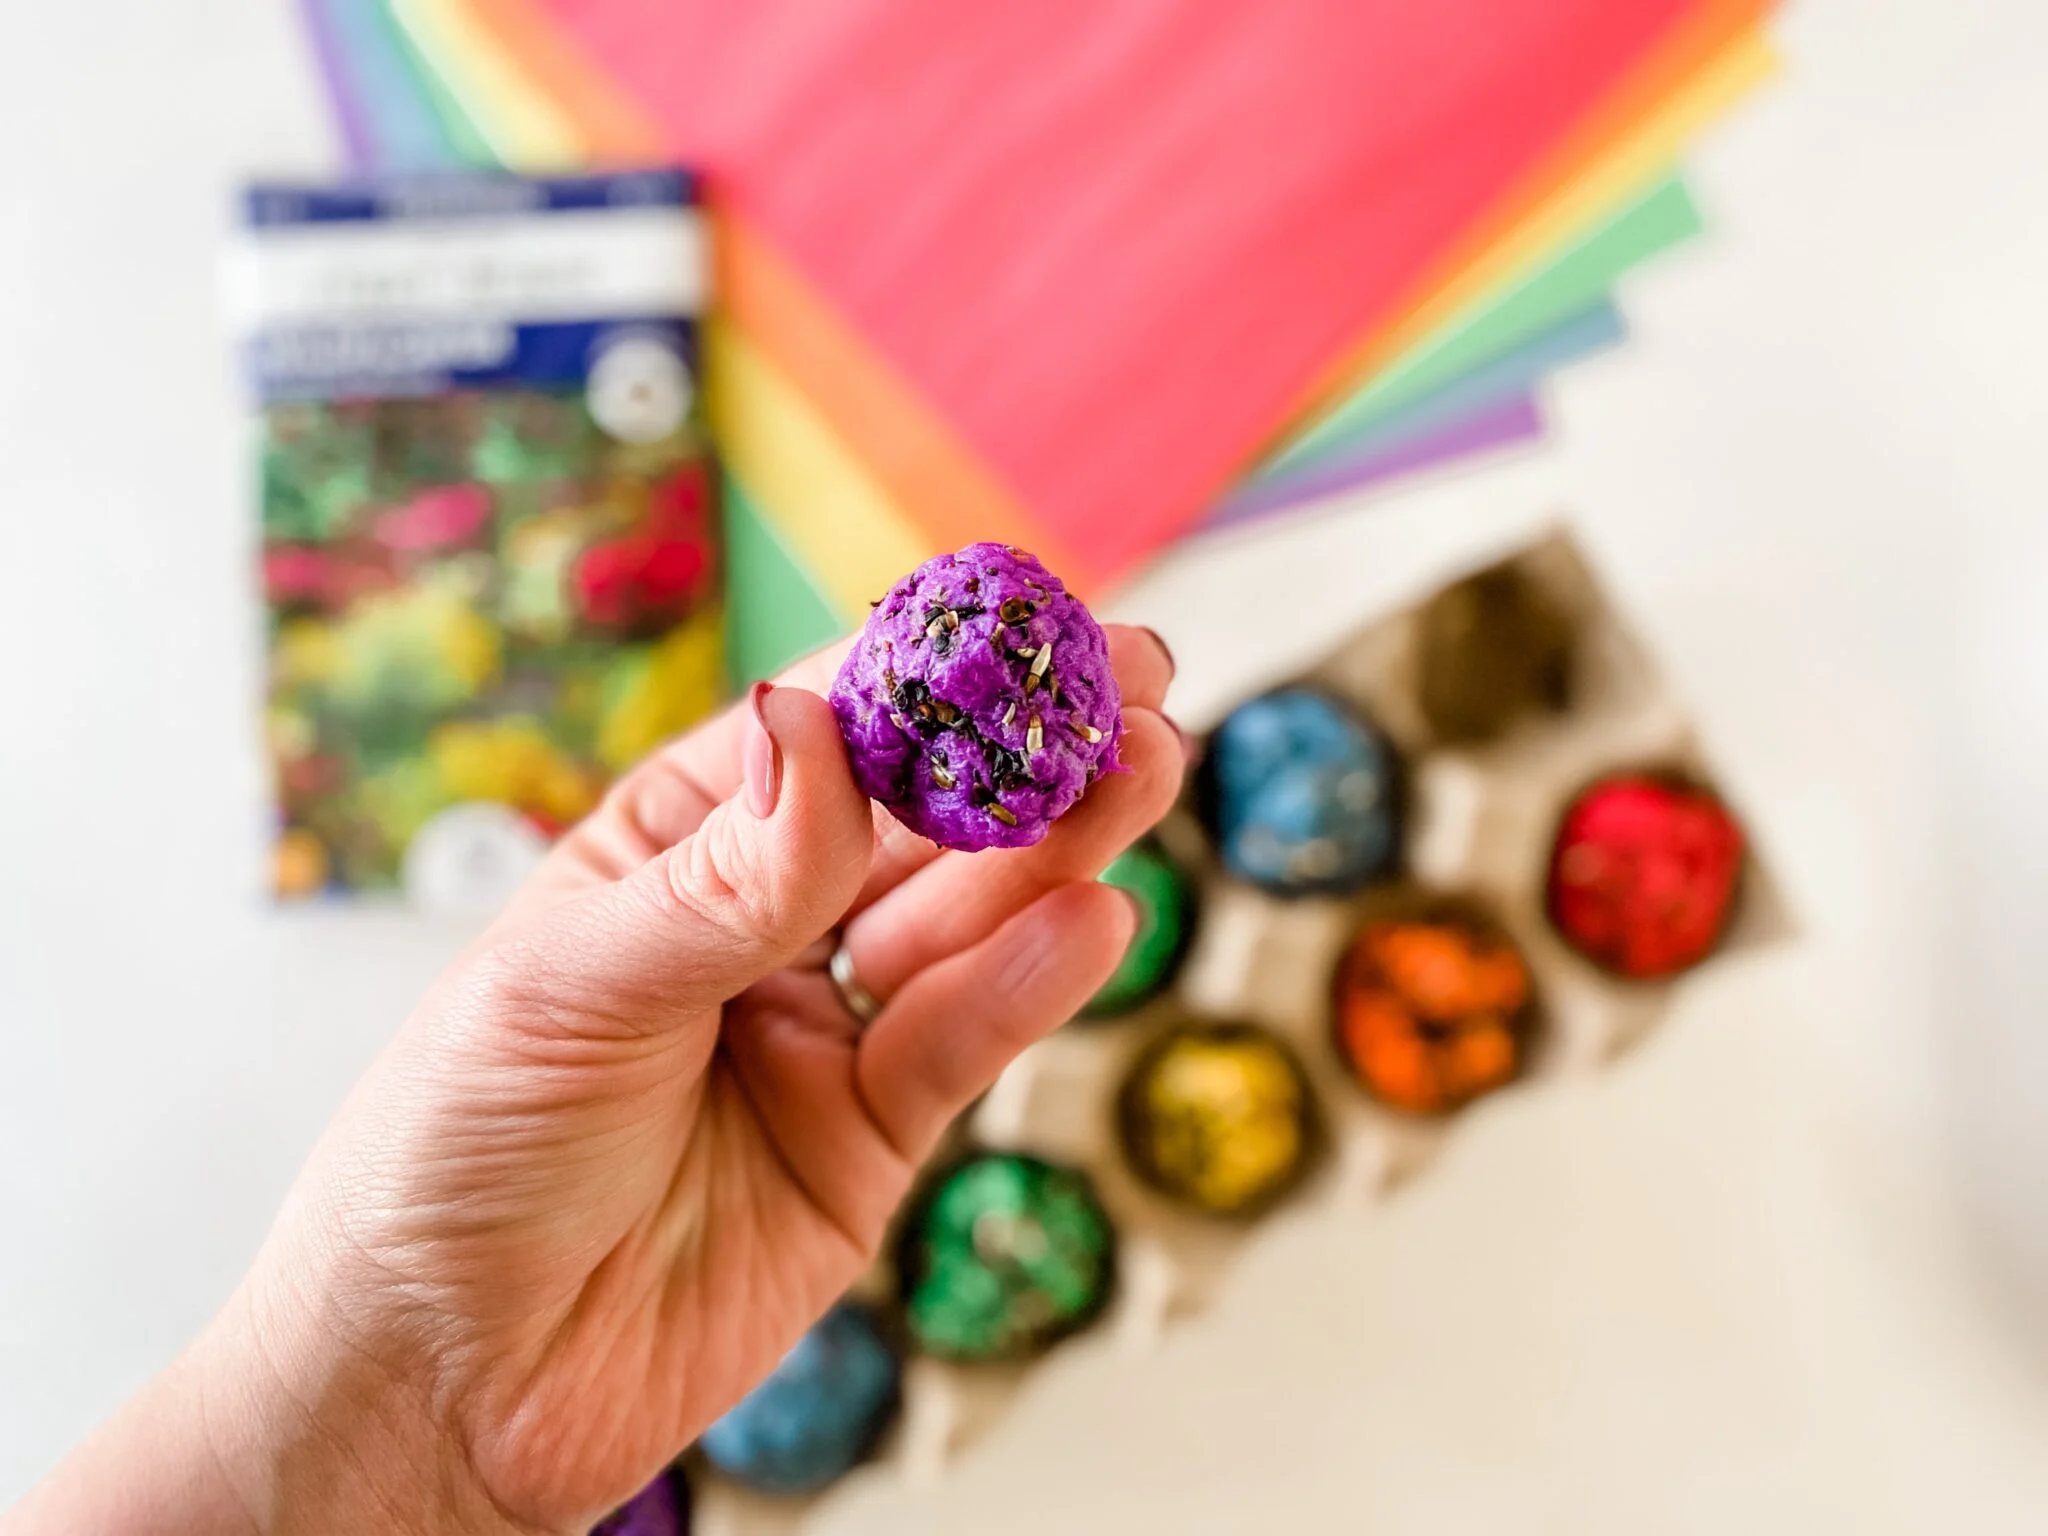 How To Make Wildflower Seed Bombs